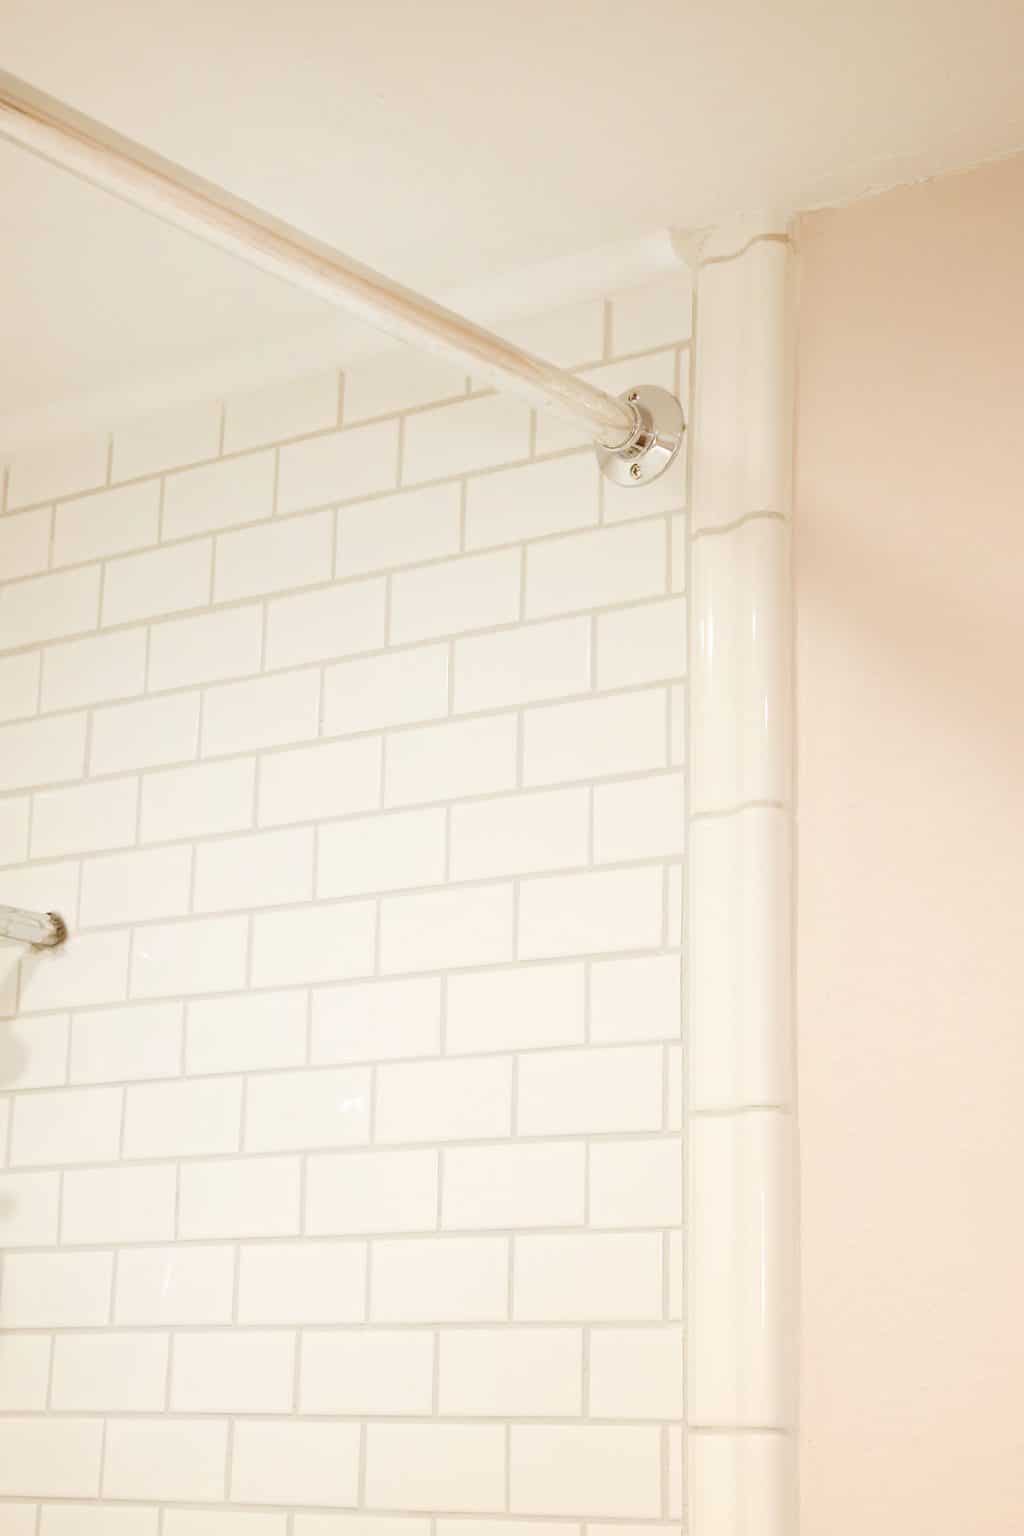 Tile To Hang A Shower Curtain, How Do I Keep My Shower Rod From Slipping On Tile